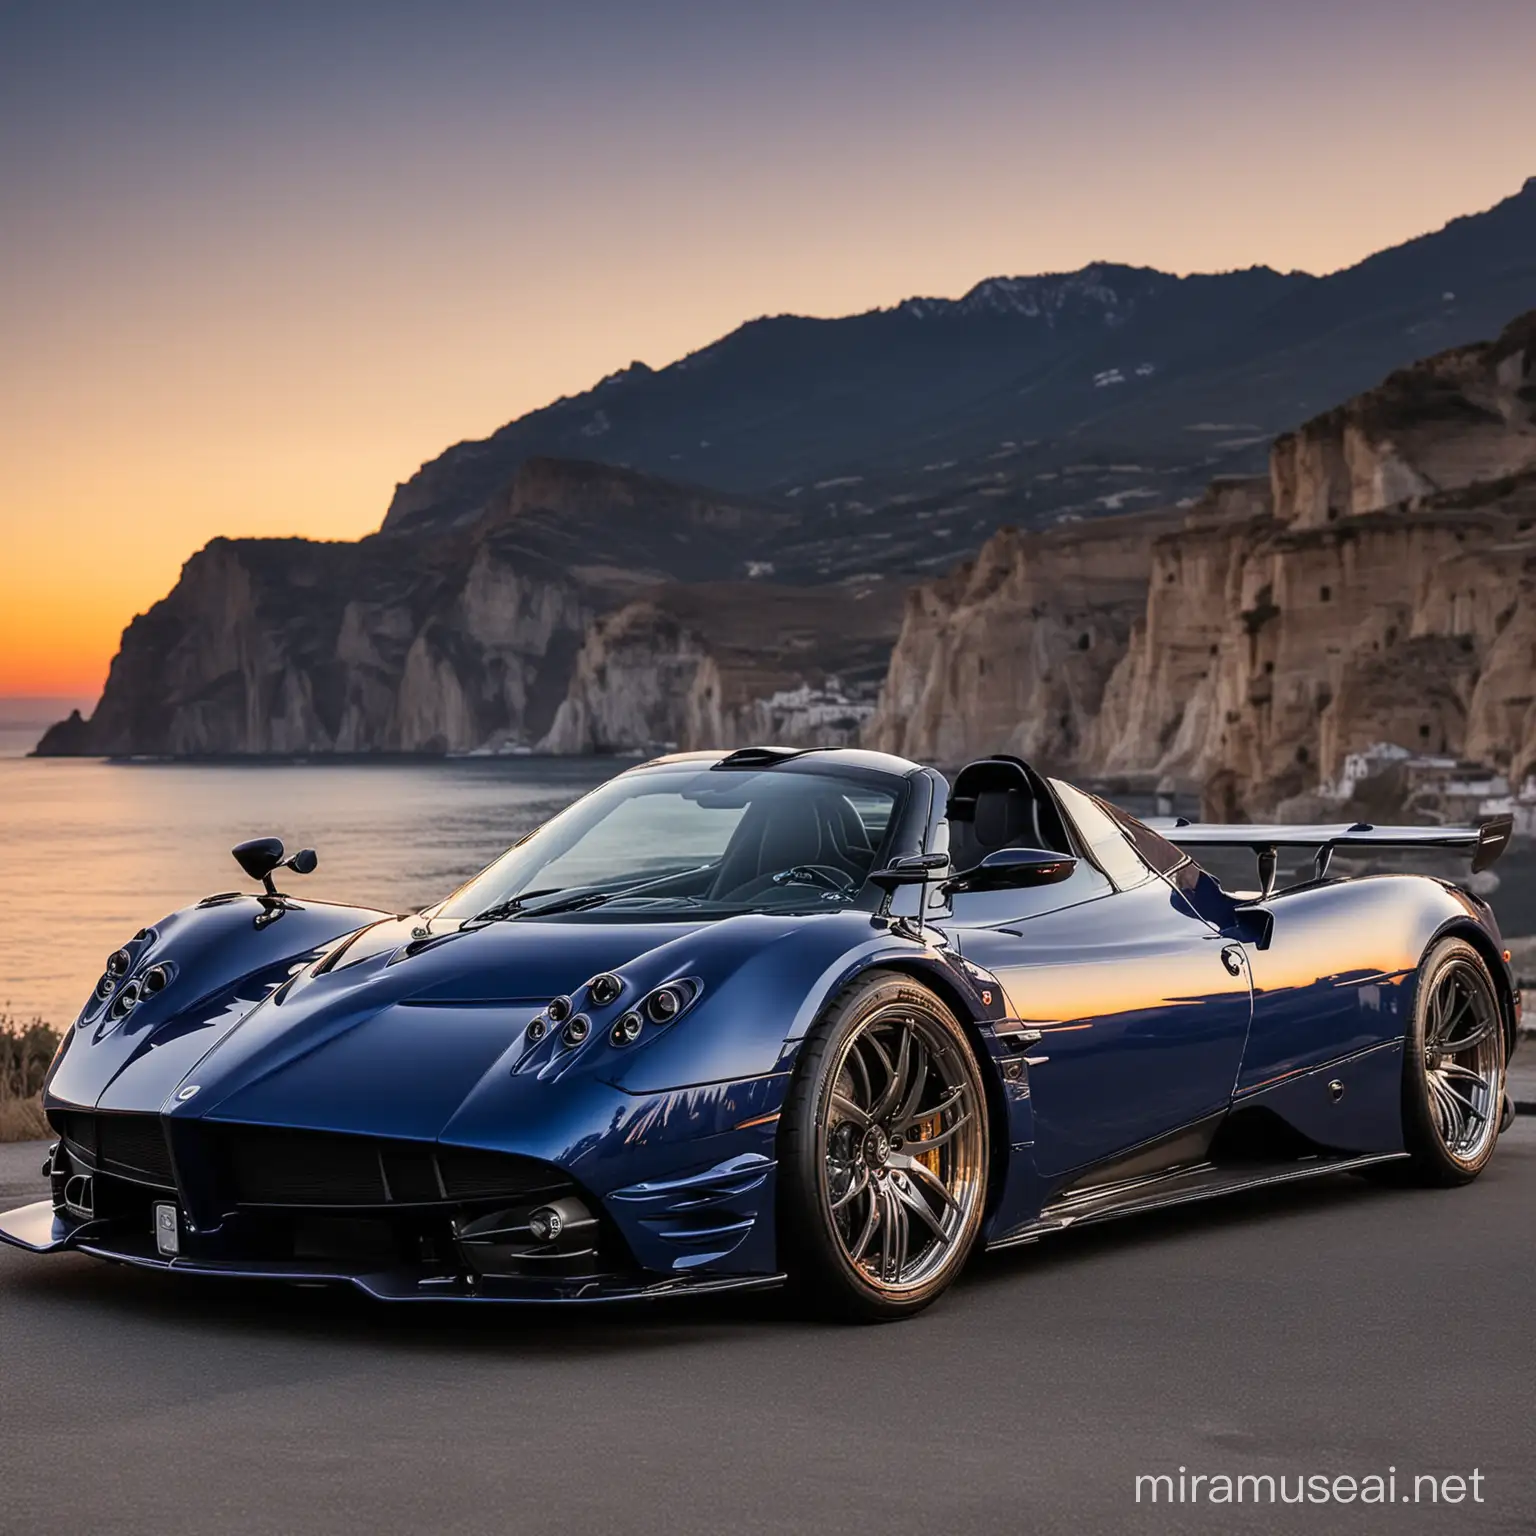 A picture of a Pagani car from the right side, in navy blue and a sunset view